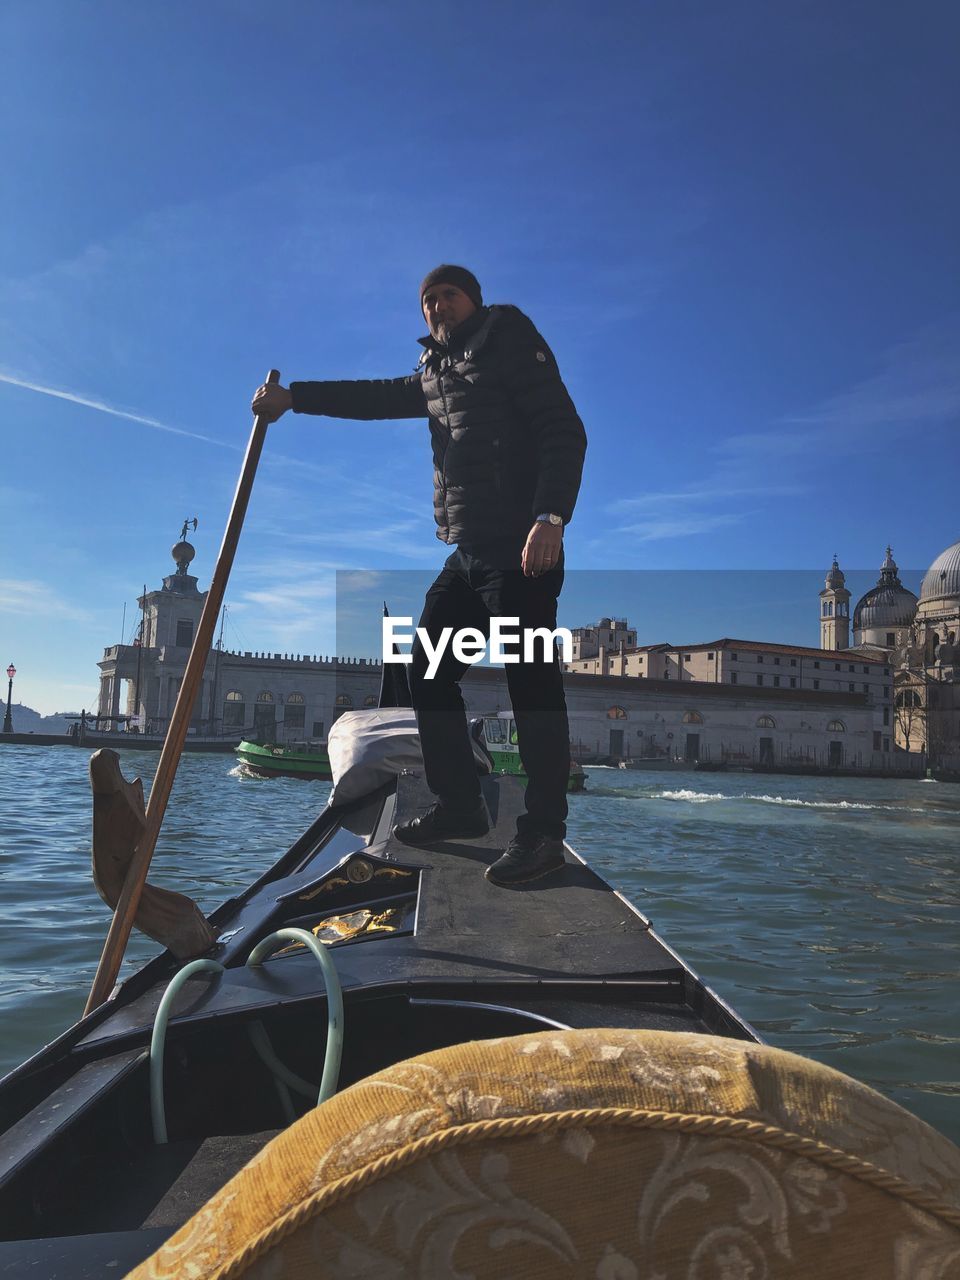 MAN ON BOAT IN CITY AGAINST SKY